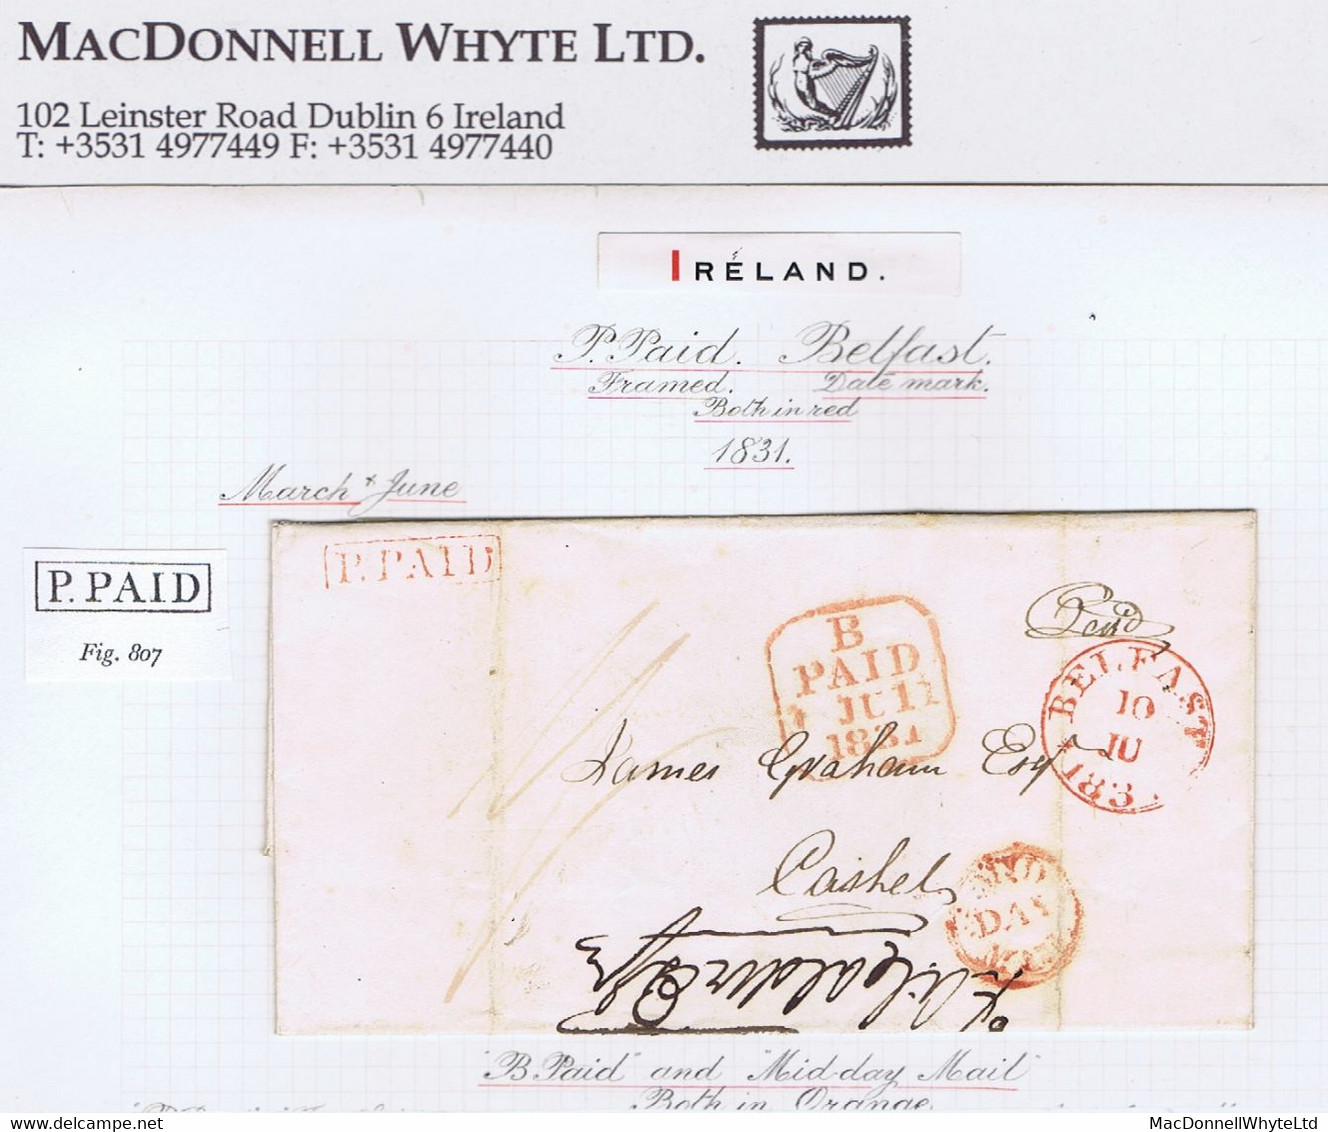 Ireland Belfast 1831 Cover To Cashel With Boxed Hs P.PAID Of Belfast In Black, BELFAST 1831 Cds For 10 JU, MID/DAY/MAIL - Préphilatélie